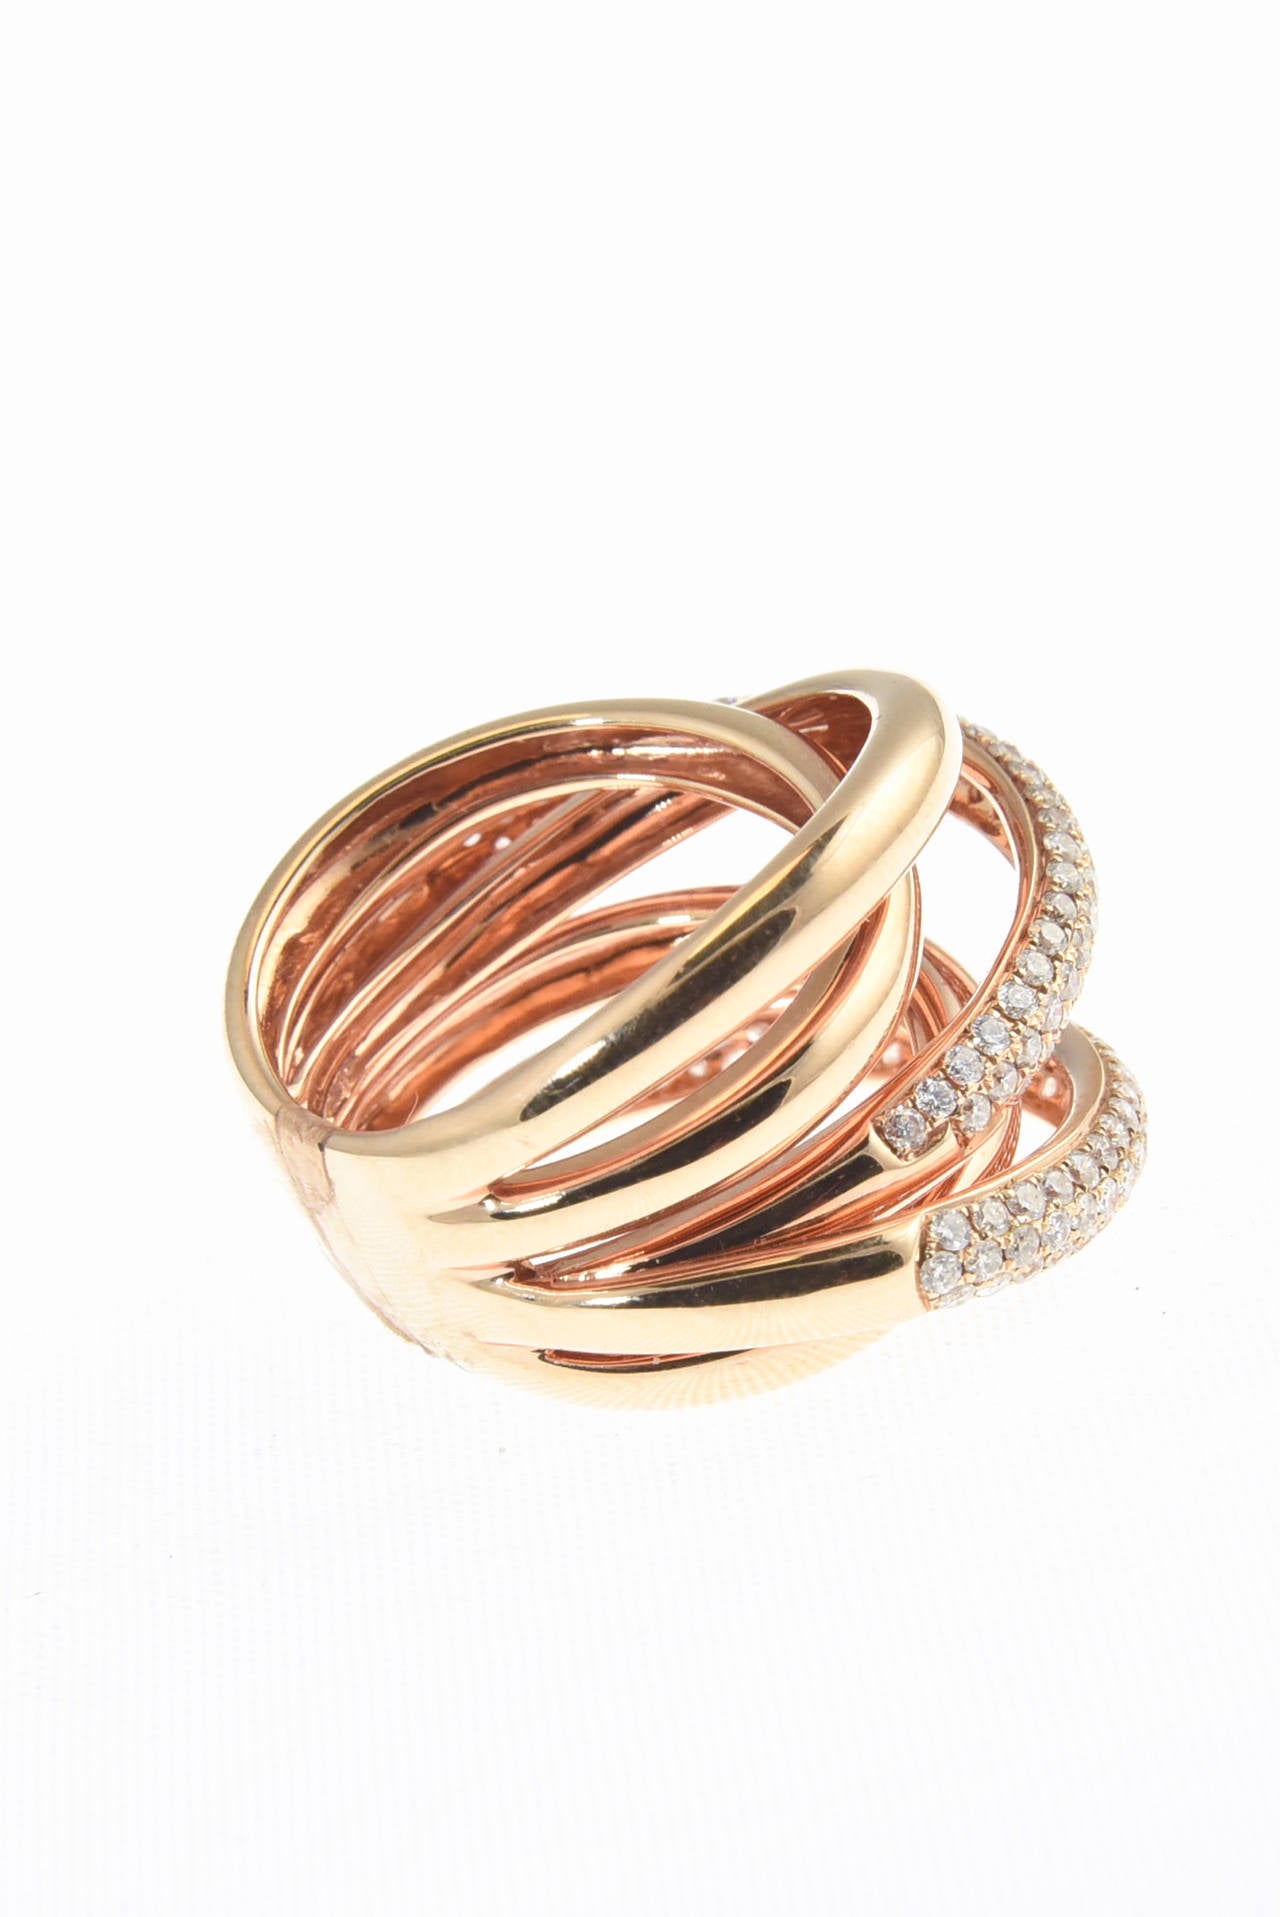 Women's Three-Dimension Pave Diamond Rose Gold Overlapping Band Ring For Sale